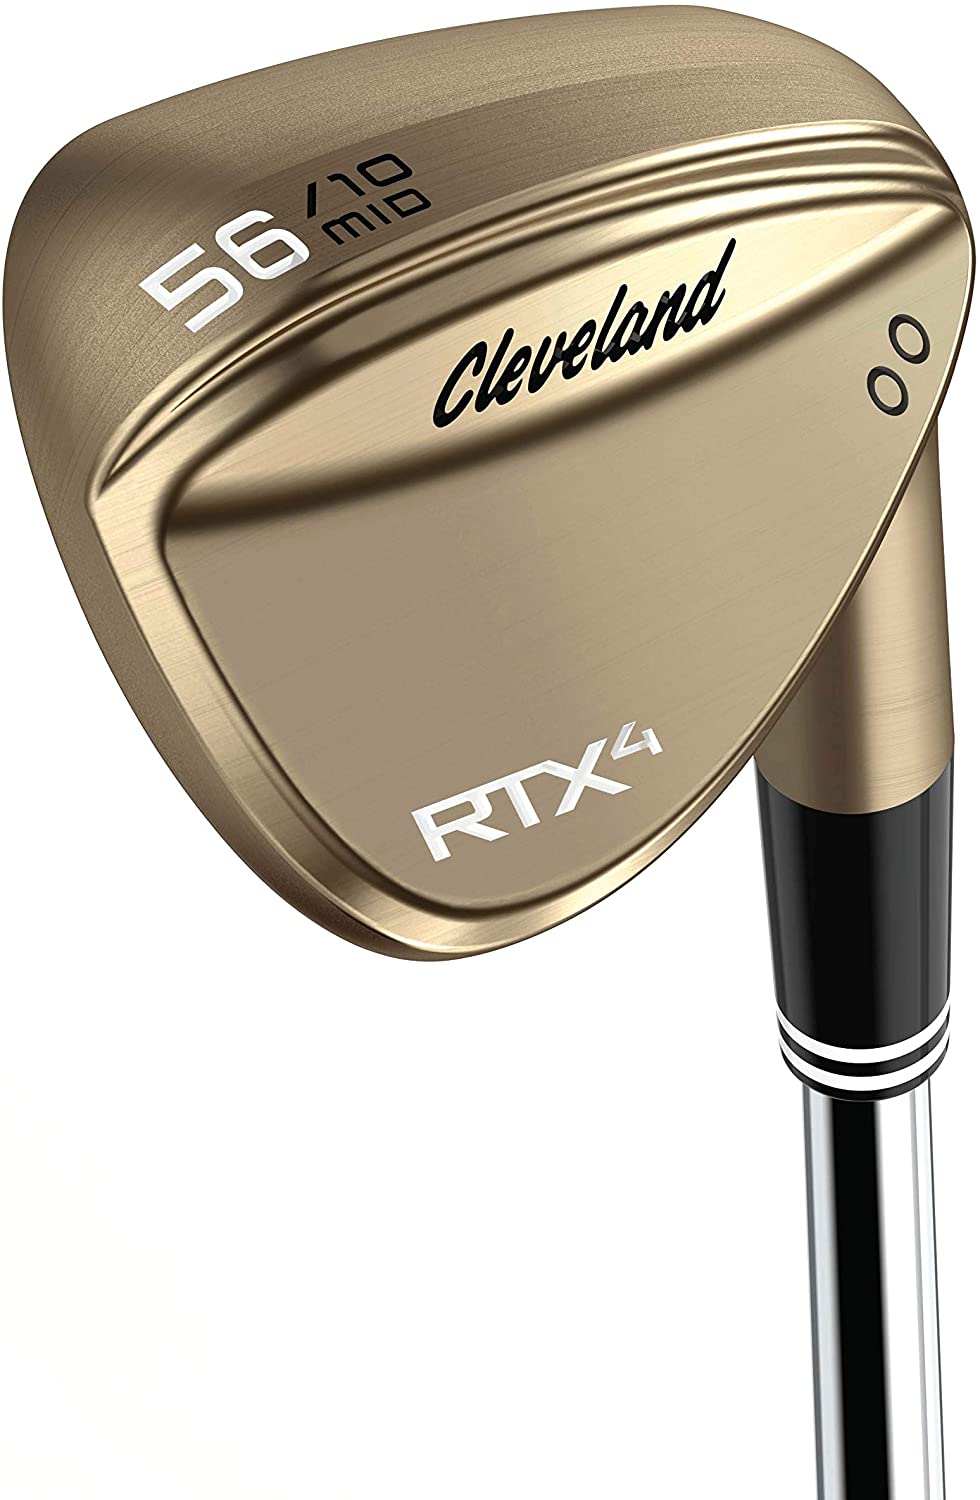 Cleveland Golf Men's RTX 4 Wedge Review